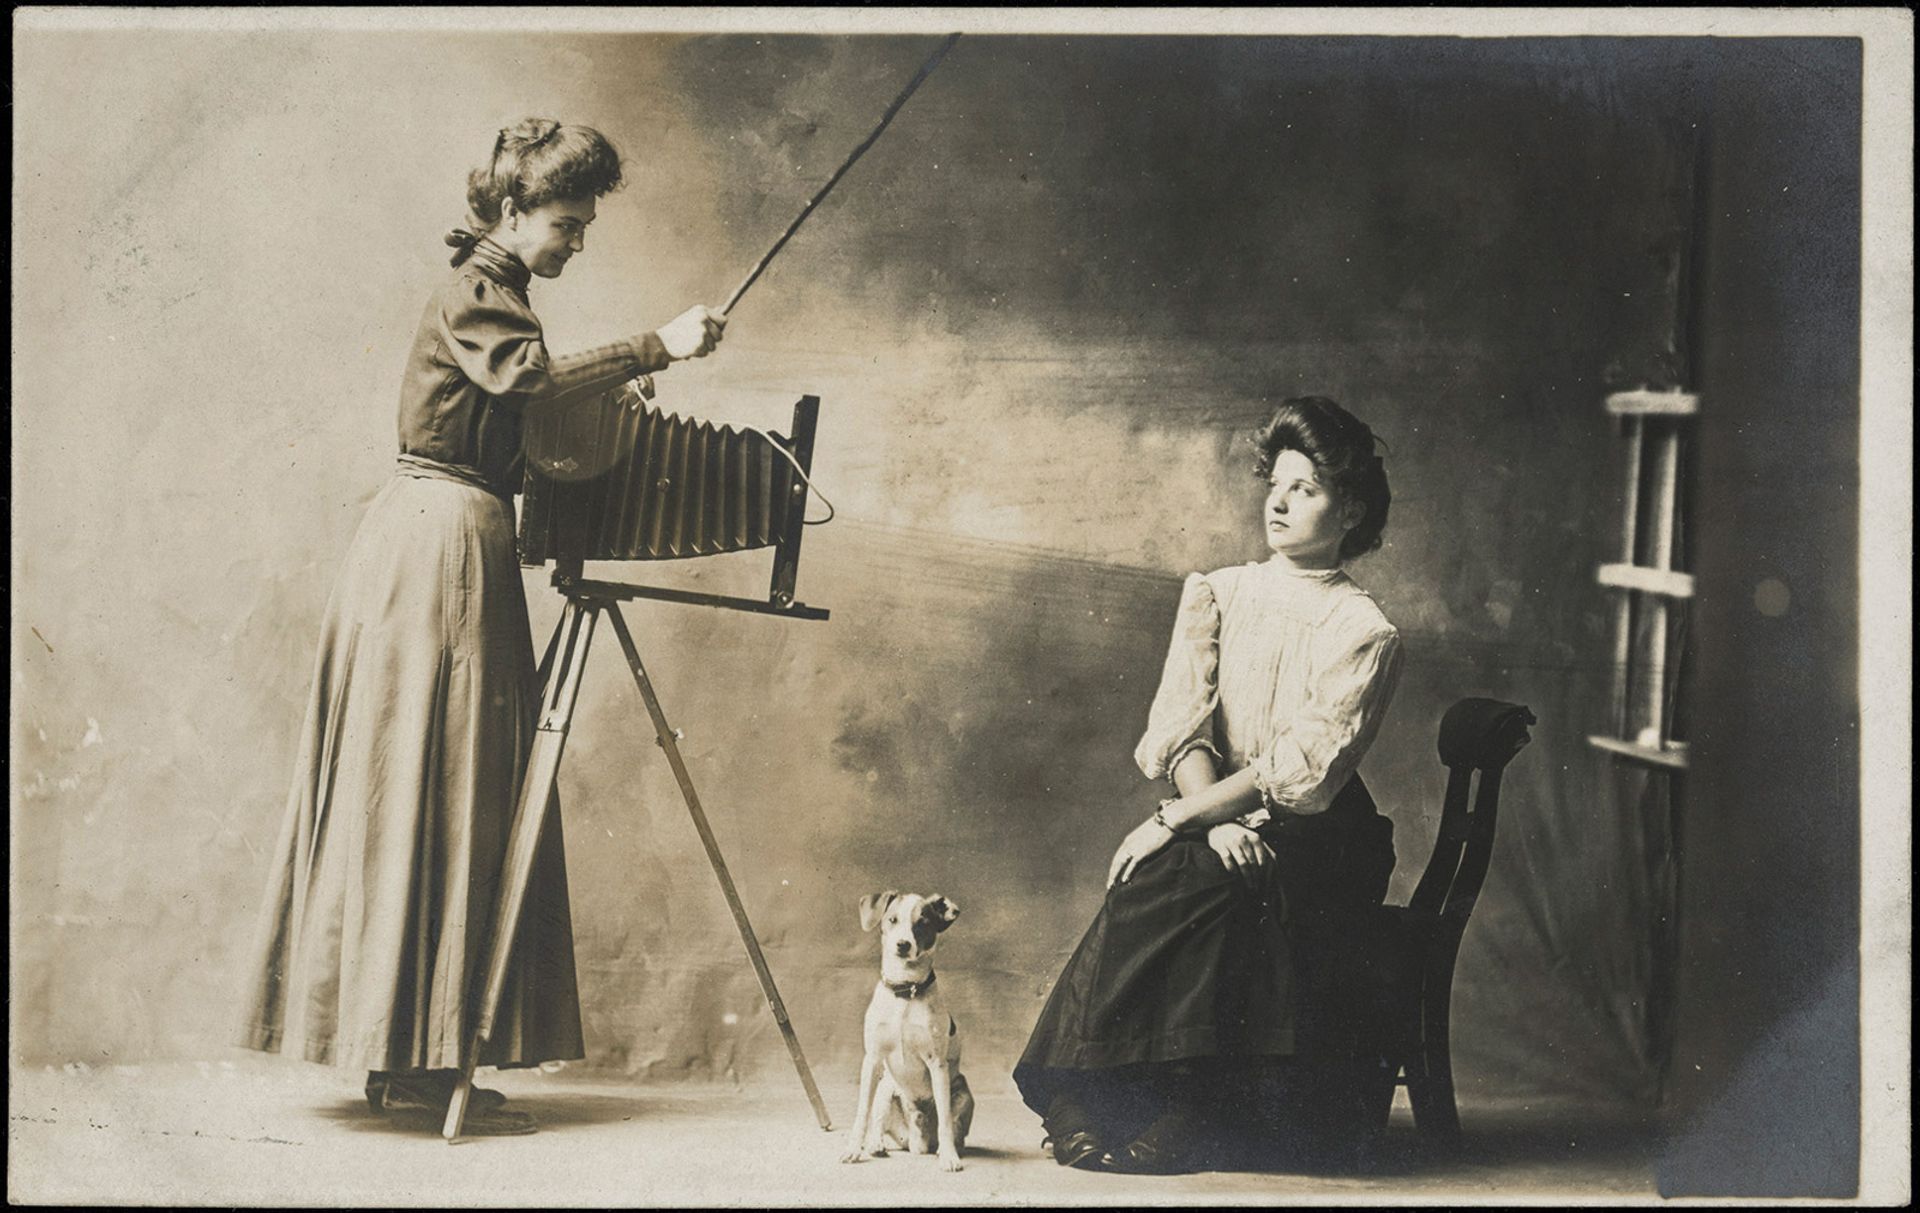 Photographer and Sitter with Dog (1907), by an unidentified artist, in the Museum of Fine Arts Boston'’s Leonard A. Lauder Postcard Archive Courtesy of Museum of Fine Arts, Boston